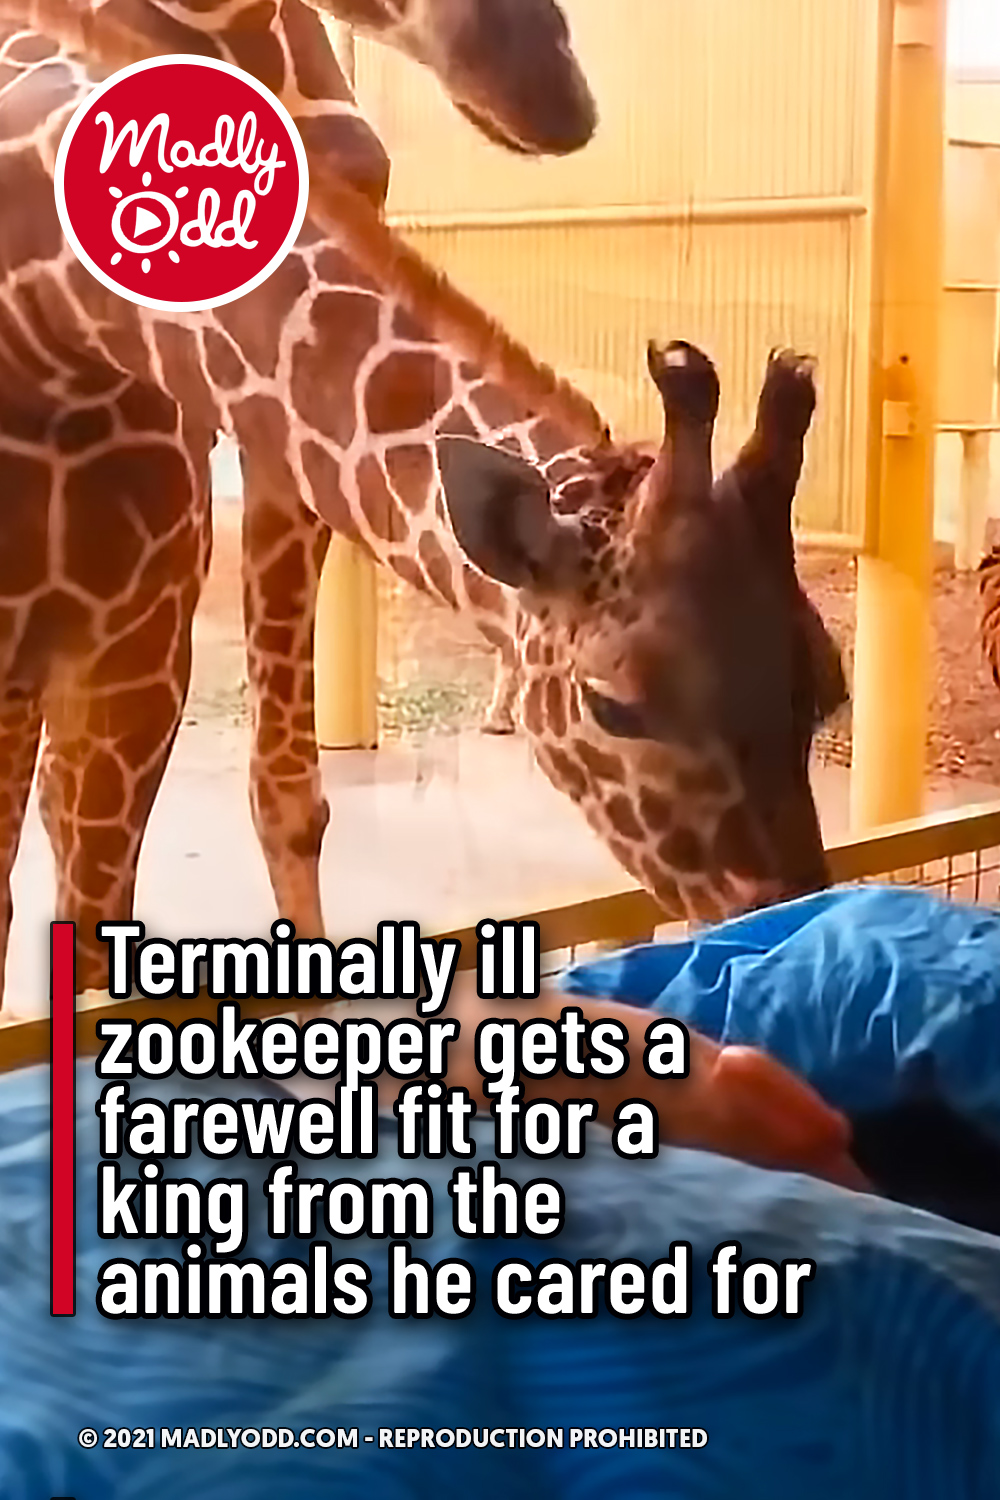 Terminally ill zookeeper gets a farewell fit for a king from the animals he cared for